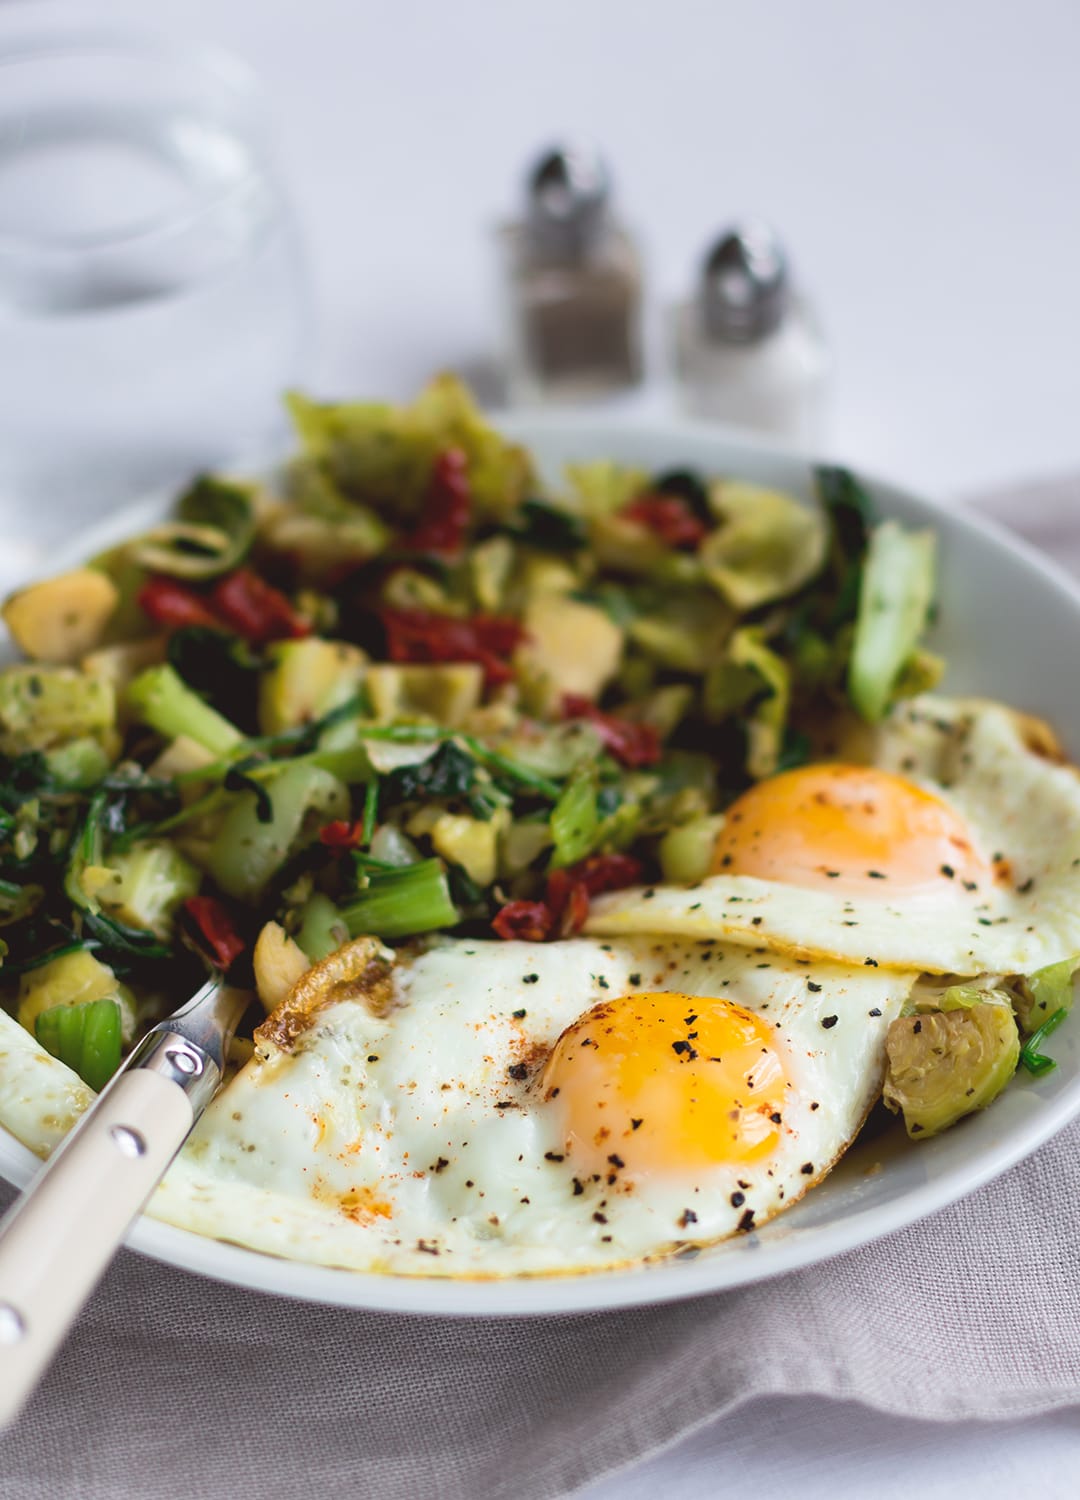 Sauteed pak Choy and Brussels Sprouts with Eggs Sunny Side Up - this is the ultimate savory breafast for a morning when you have a little bit more time to spend in the kitchen. It's probably my most favorite savory breakfast, because it includes eggs and all things green (I also sneaked in some baby spinach for even more of a healthy kick!) . I love to pair this with avocado on toast. | thehealthfulideas.com